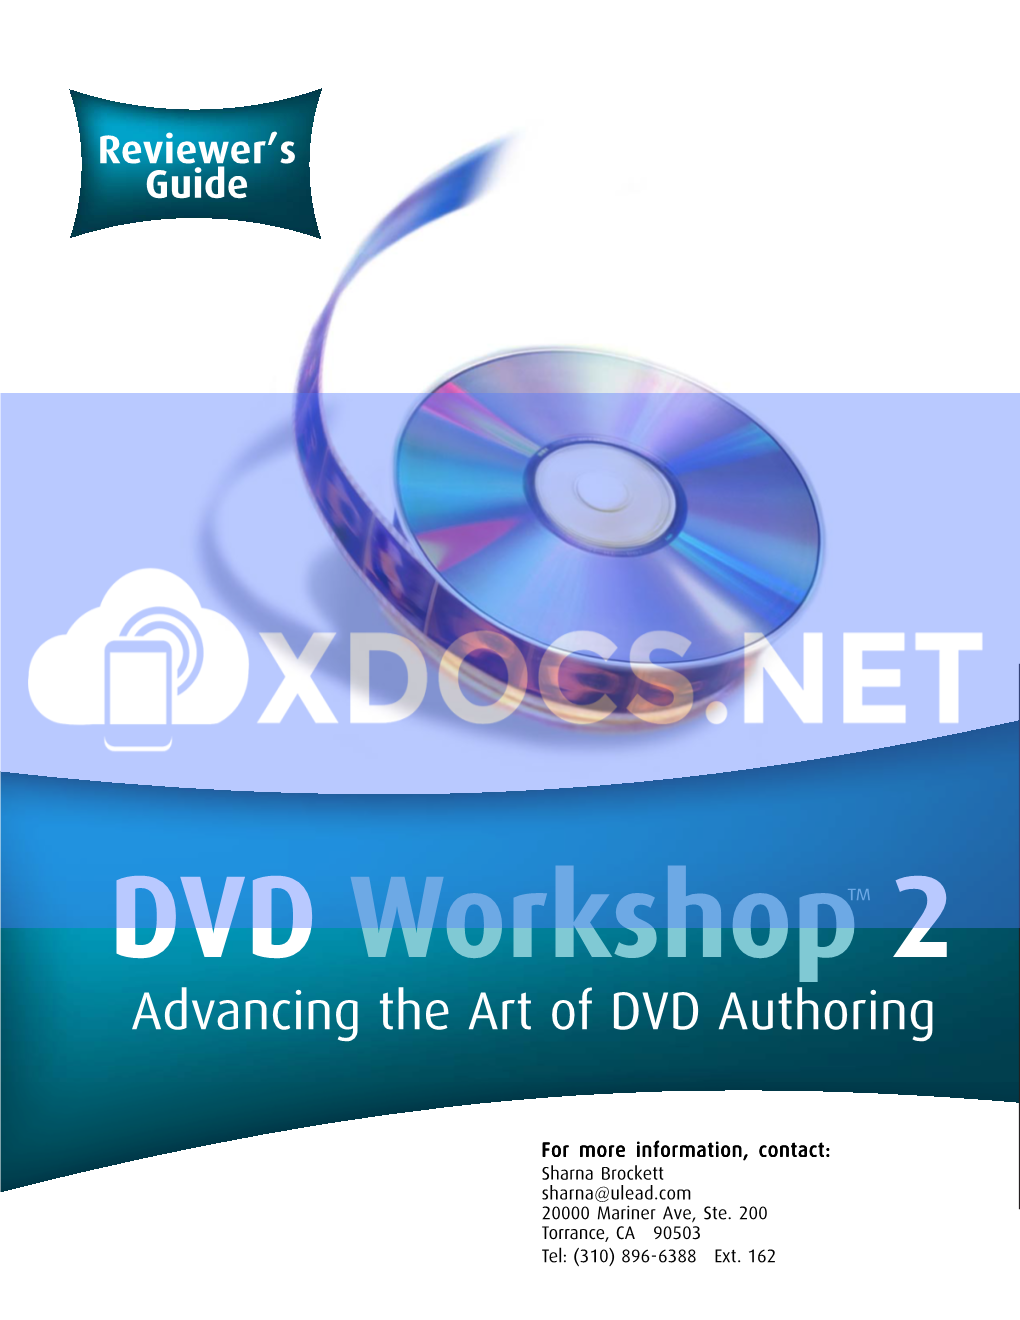 DVD Workshop 22, Powerful and Intuitive Authoring Software for Producing Professional Dvds